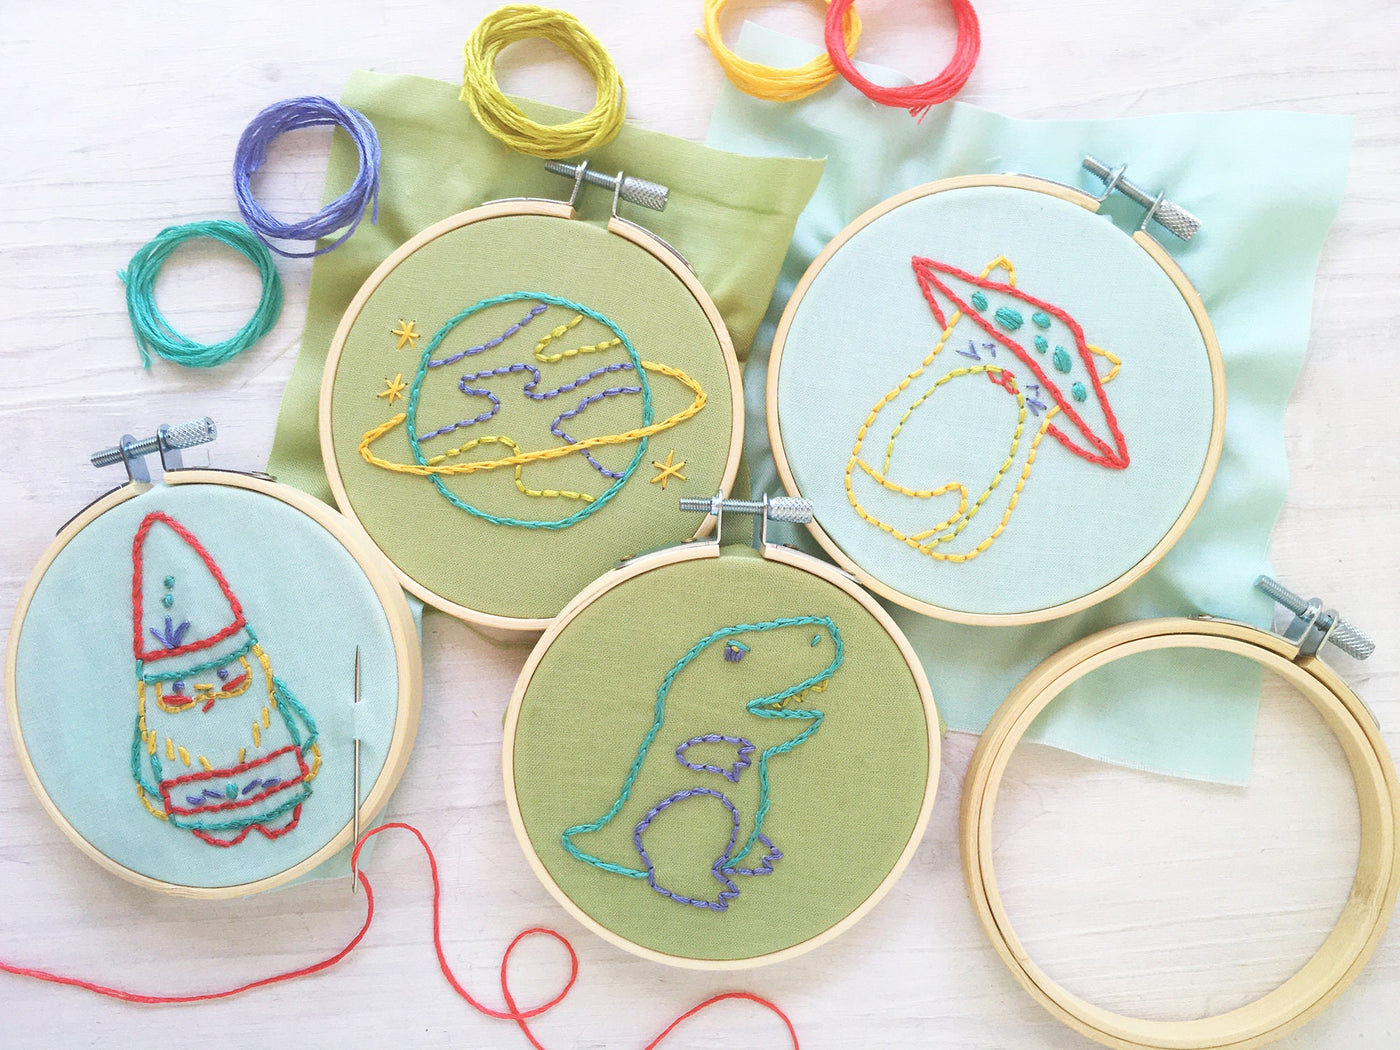 Kid Stitch Kit, Hand Embroidery For Kids, learn to embroider – Little Dear  Shop